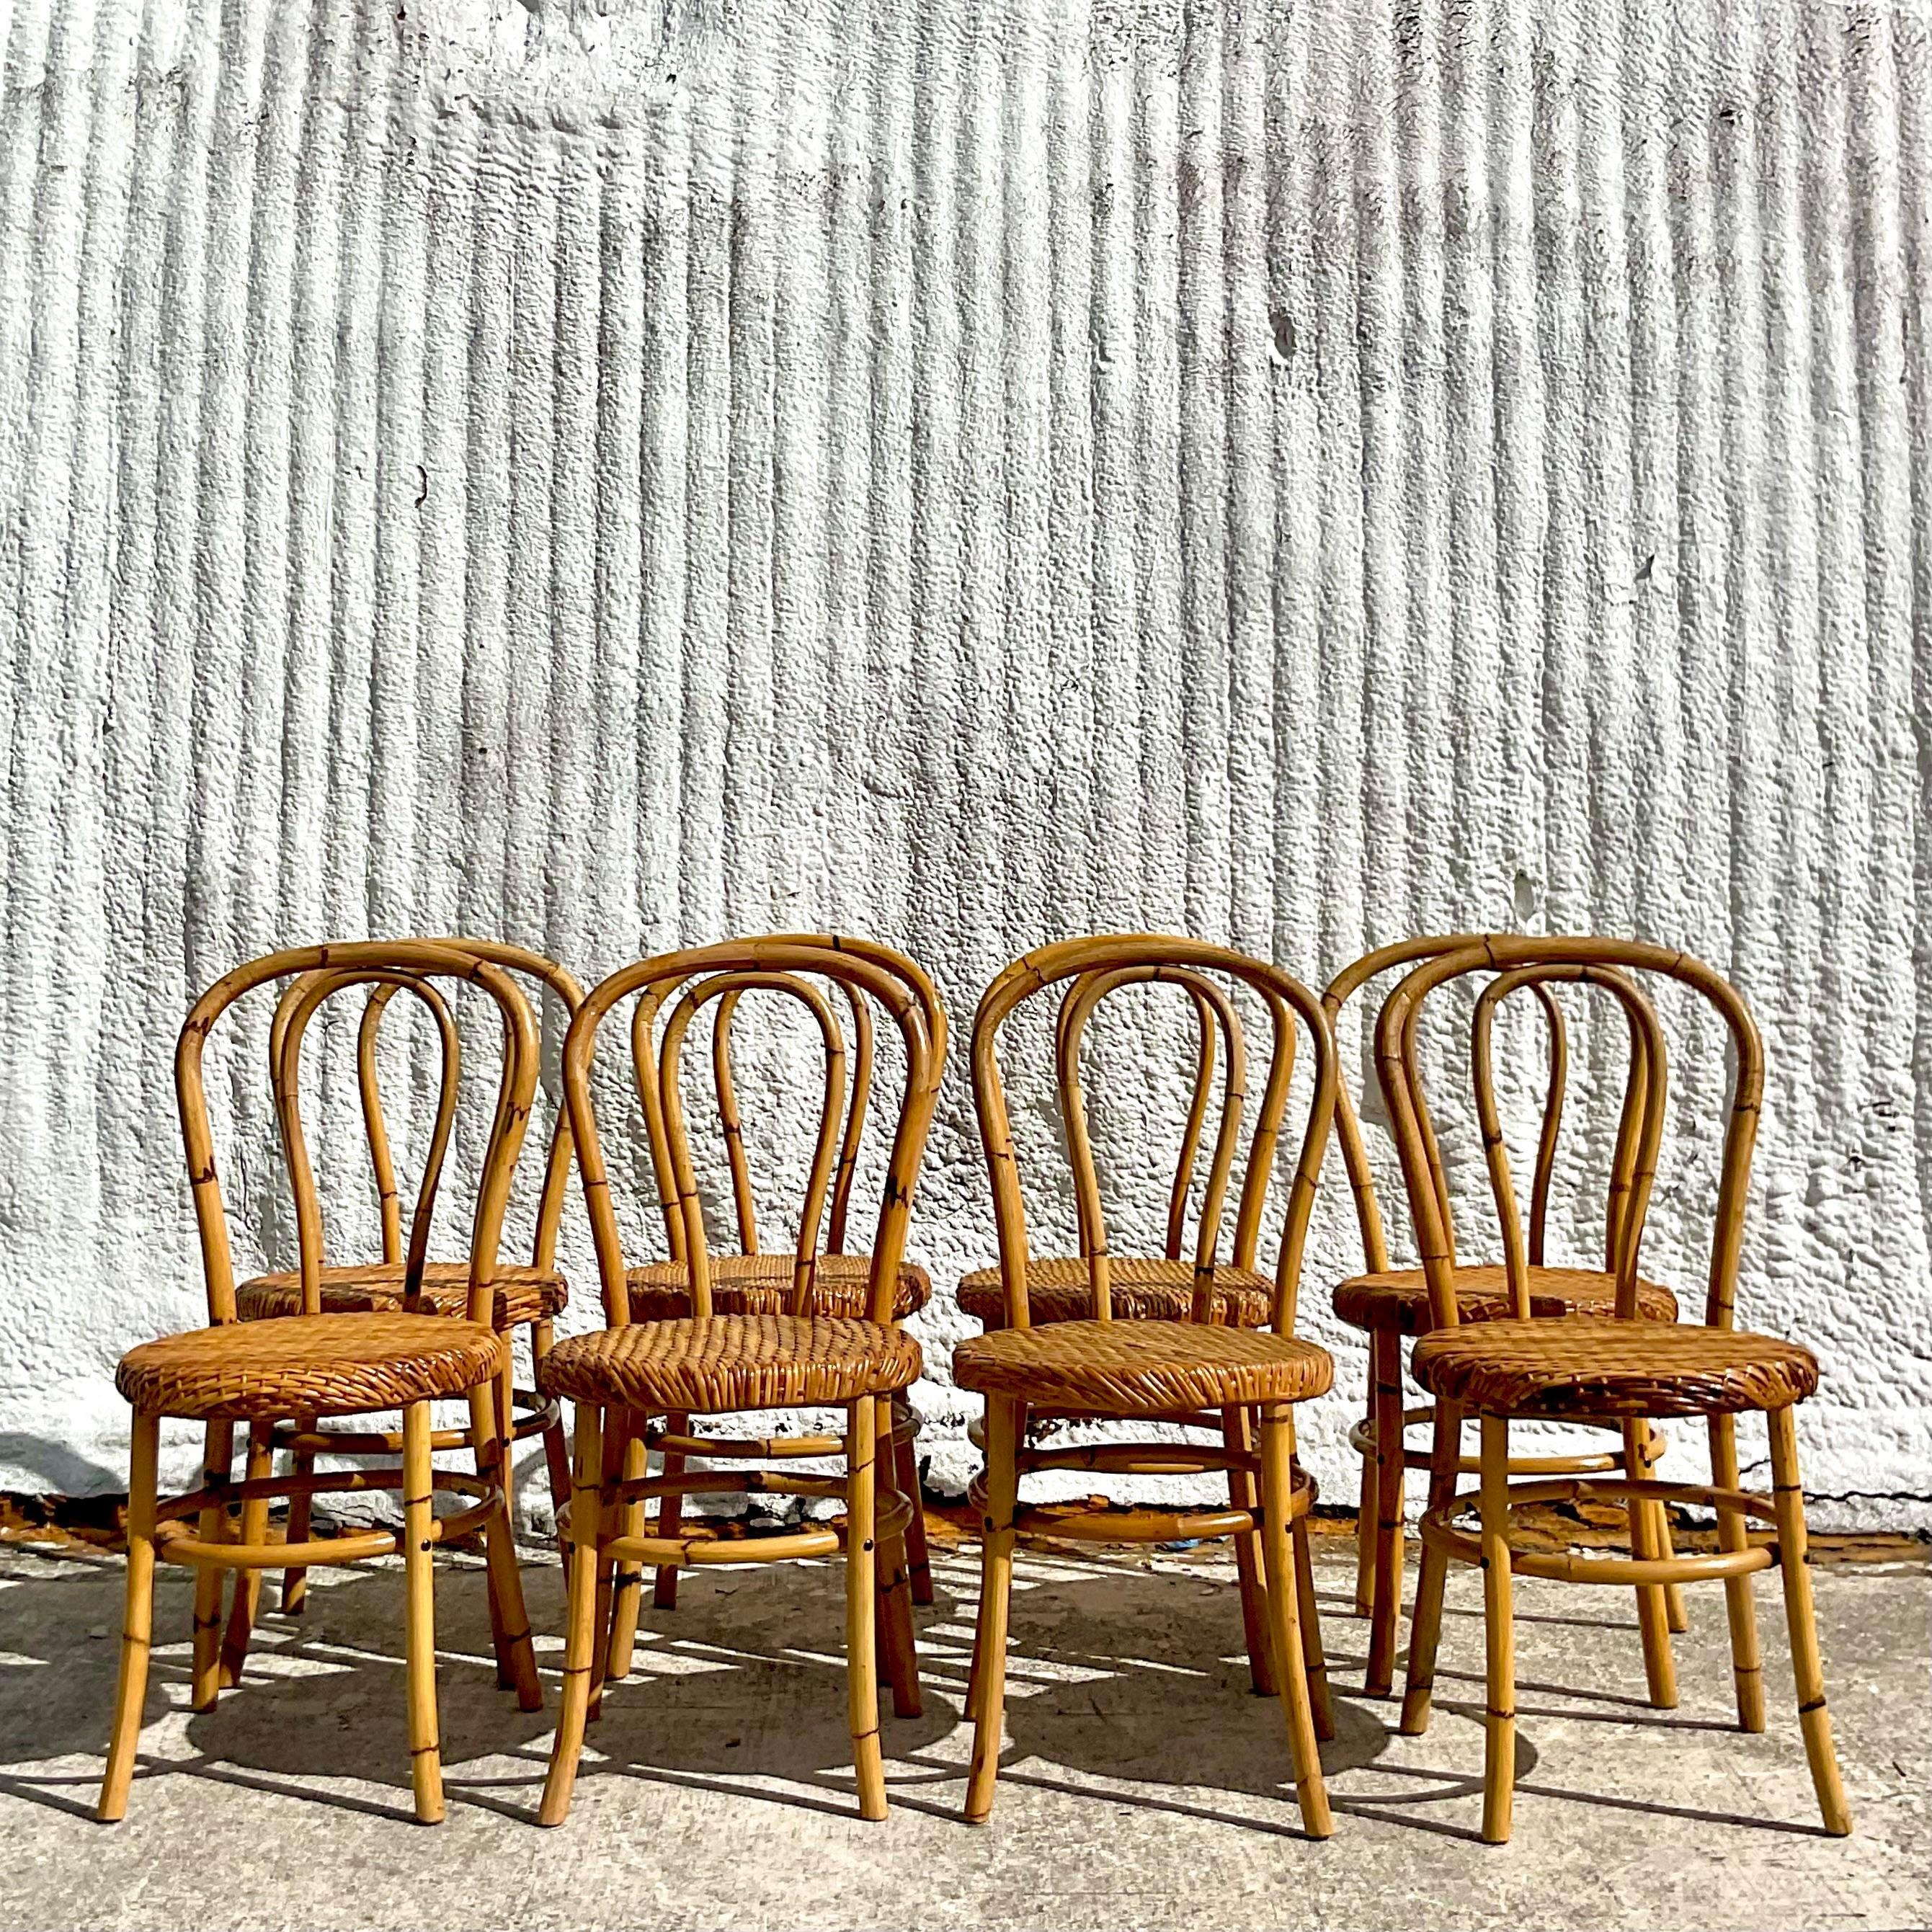 Vintage Coastal Rare McGuire Bent Bamboo Dining Chairs - Set of 8 In Good Condition For Sale In west palm beach, FL